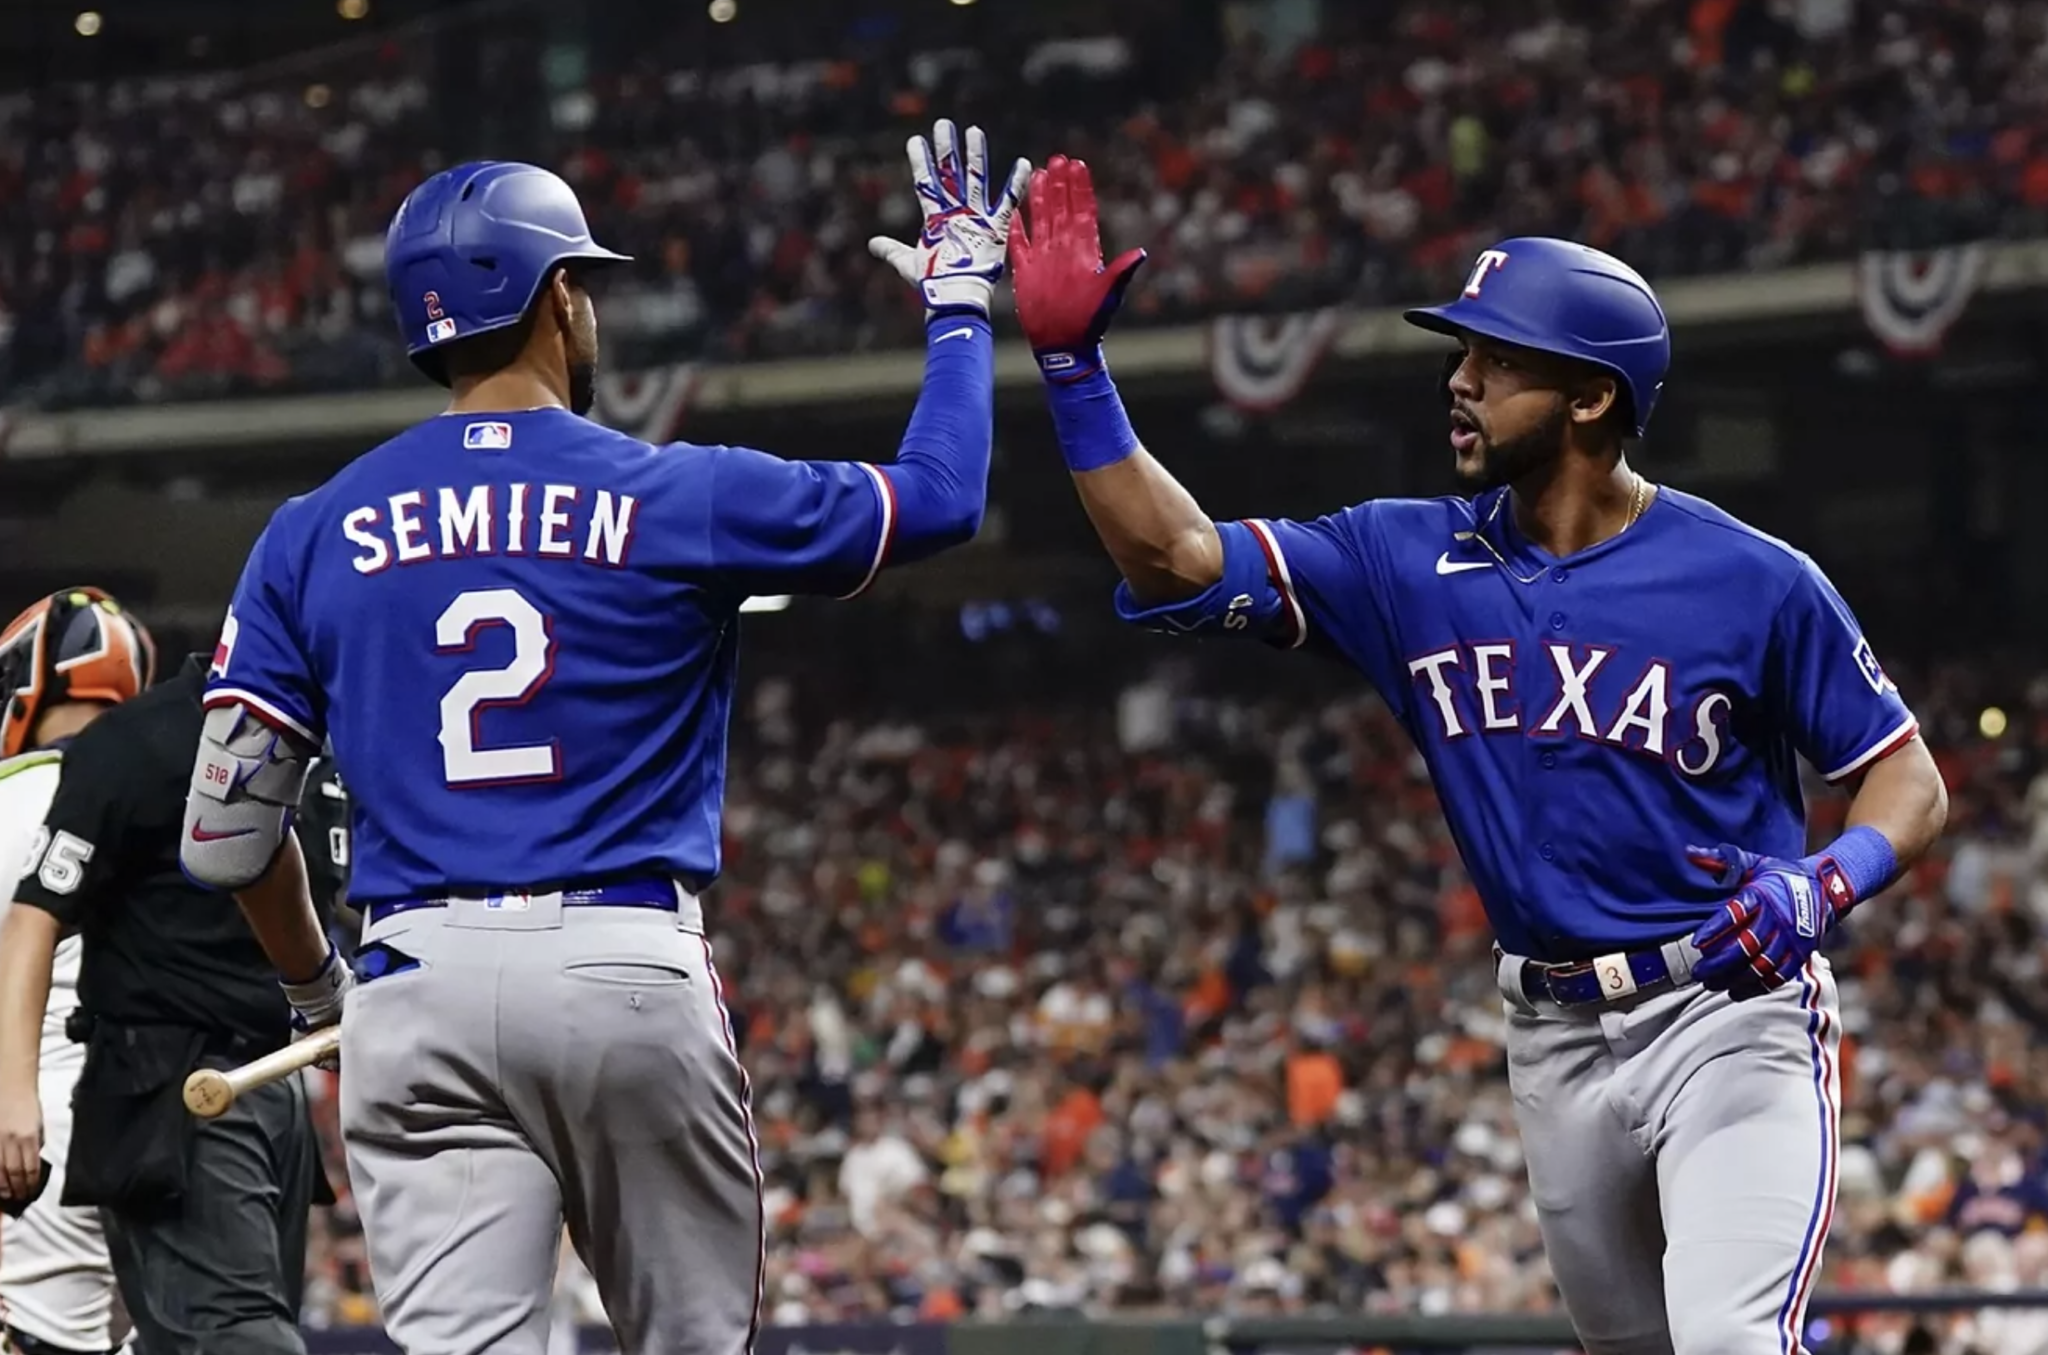 How much money do the Texas Rangers get if they reach the MLB World Series?